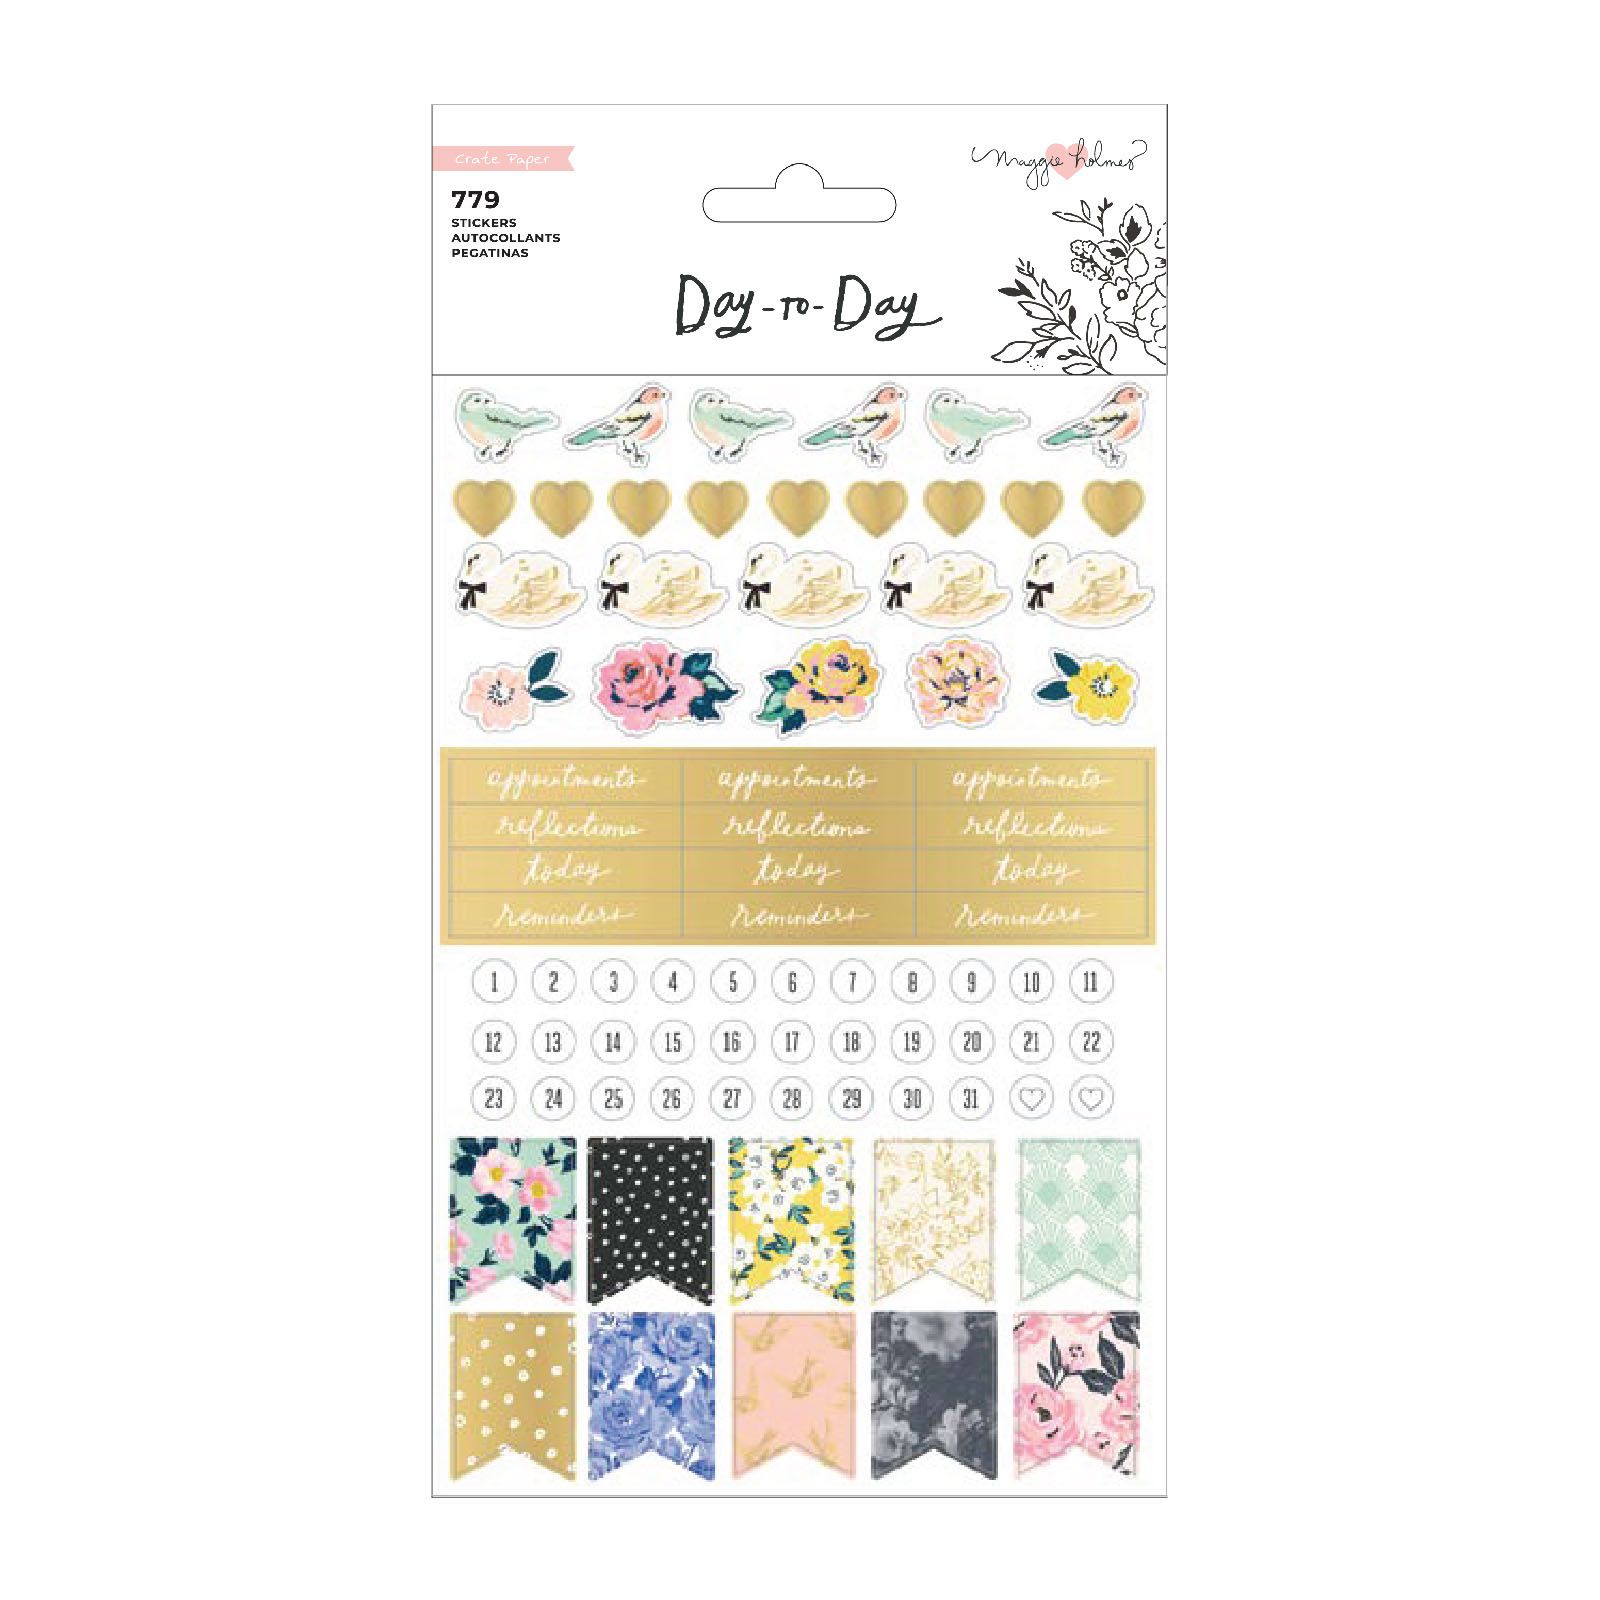 Crate Paper • Day-to-Day disc planner sticker book Phrase